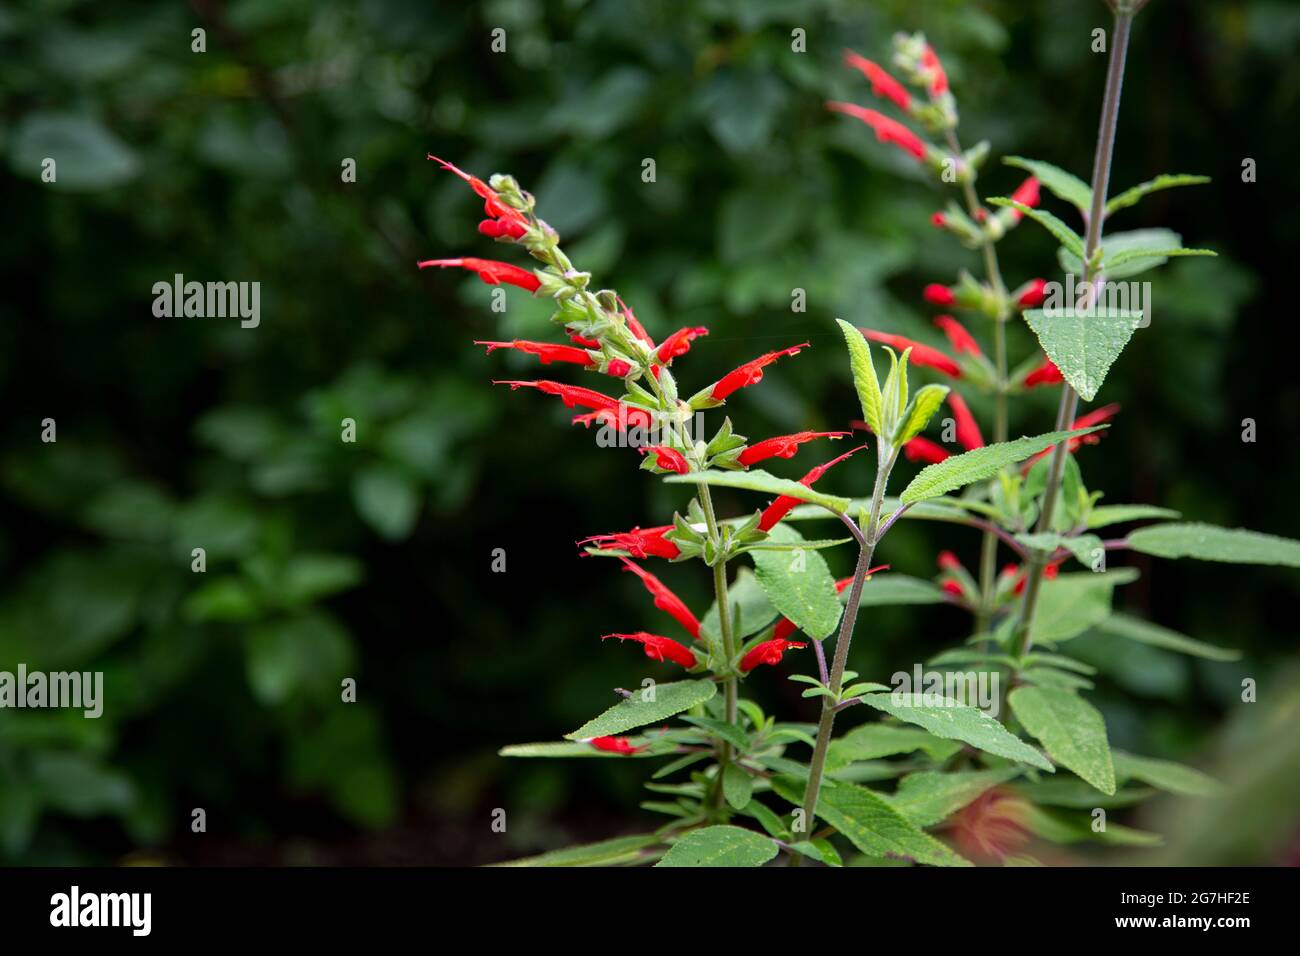 The red flowers of the Salvia haenkei 'Prawn Chorus' sage at the Chelsea Physic Garden in London, UK, look like little prawns.   The Chelsea Physic Ga Stock Photo